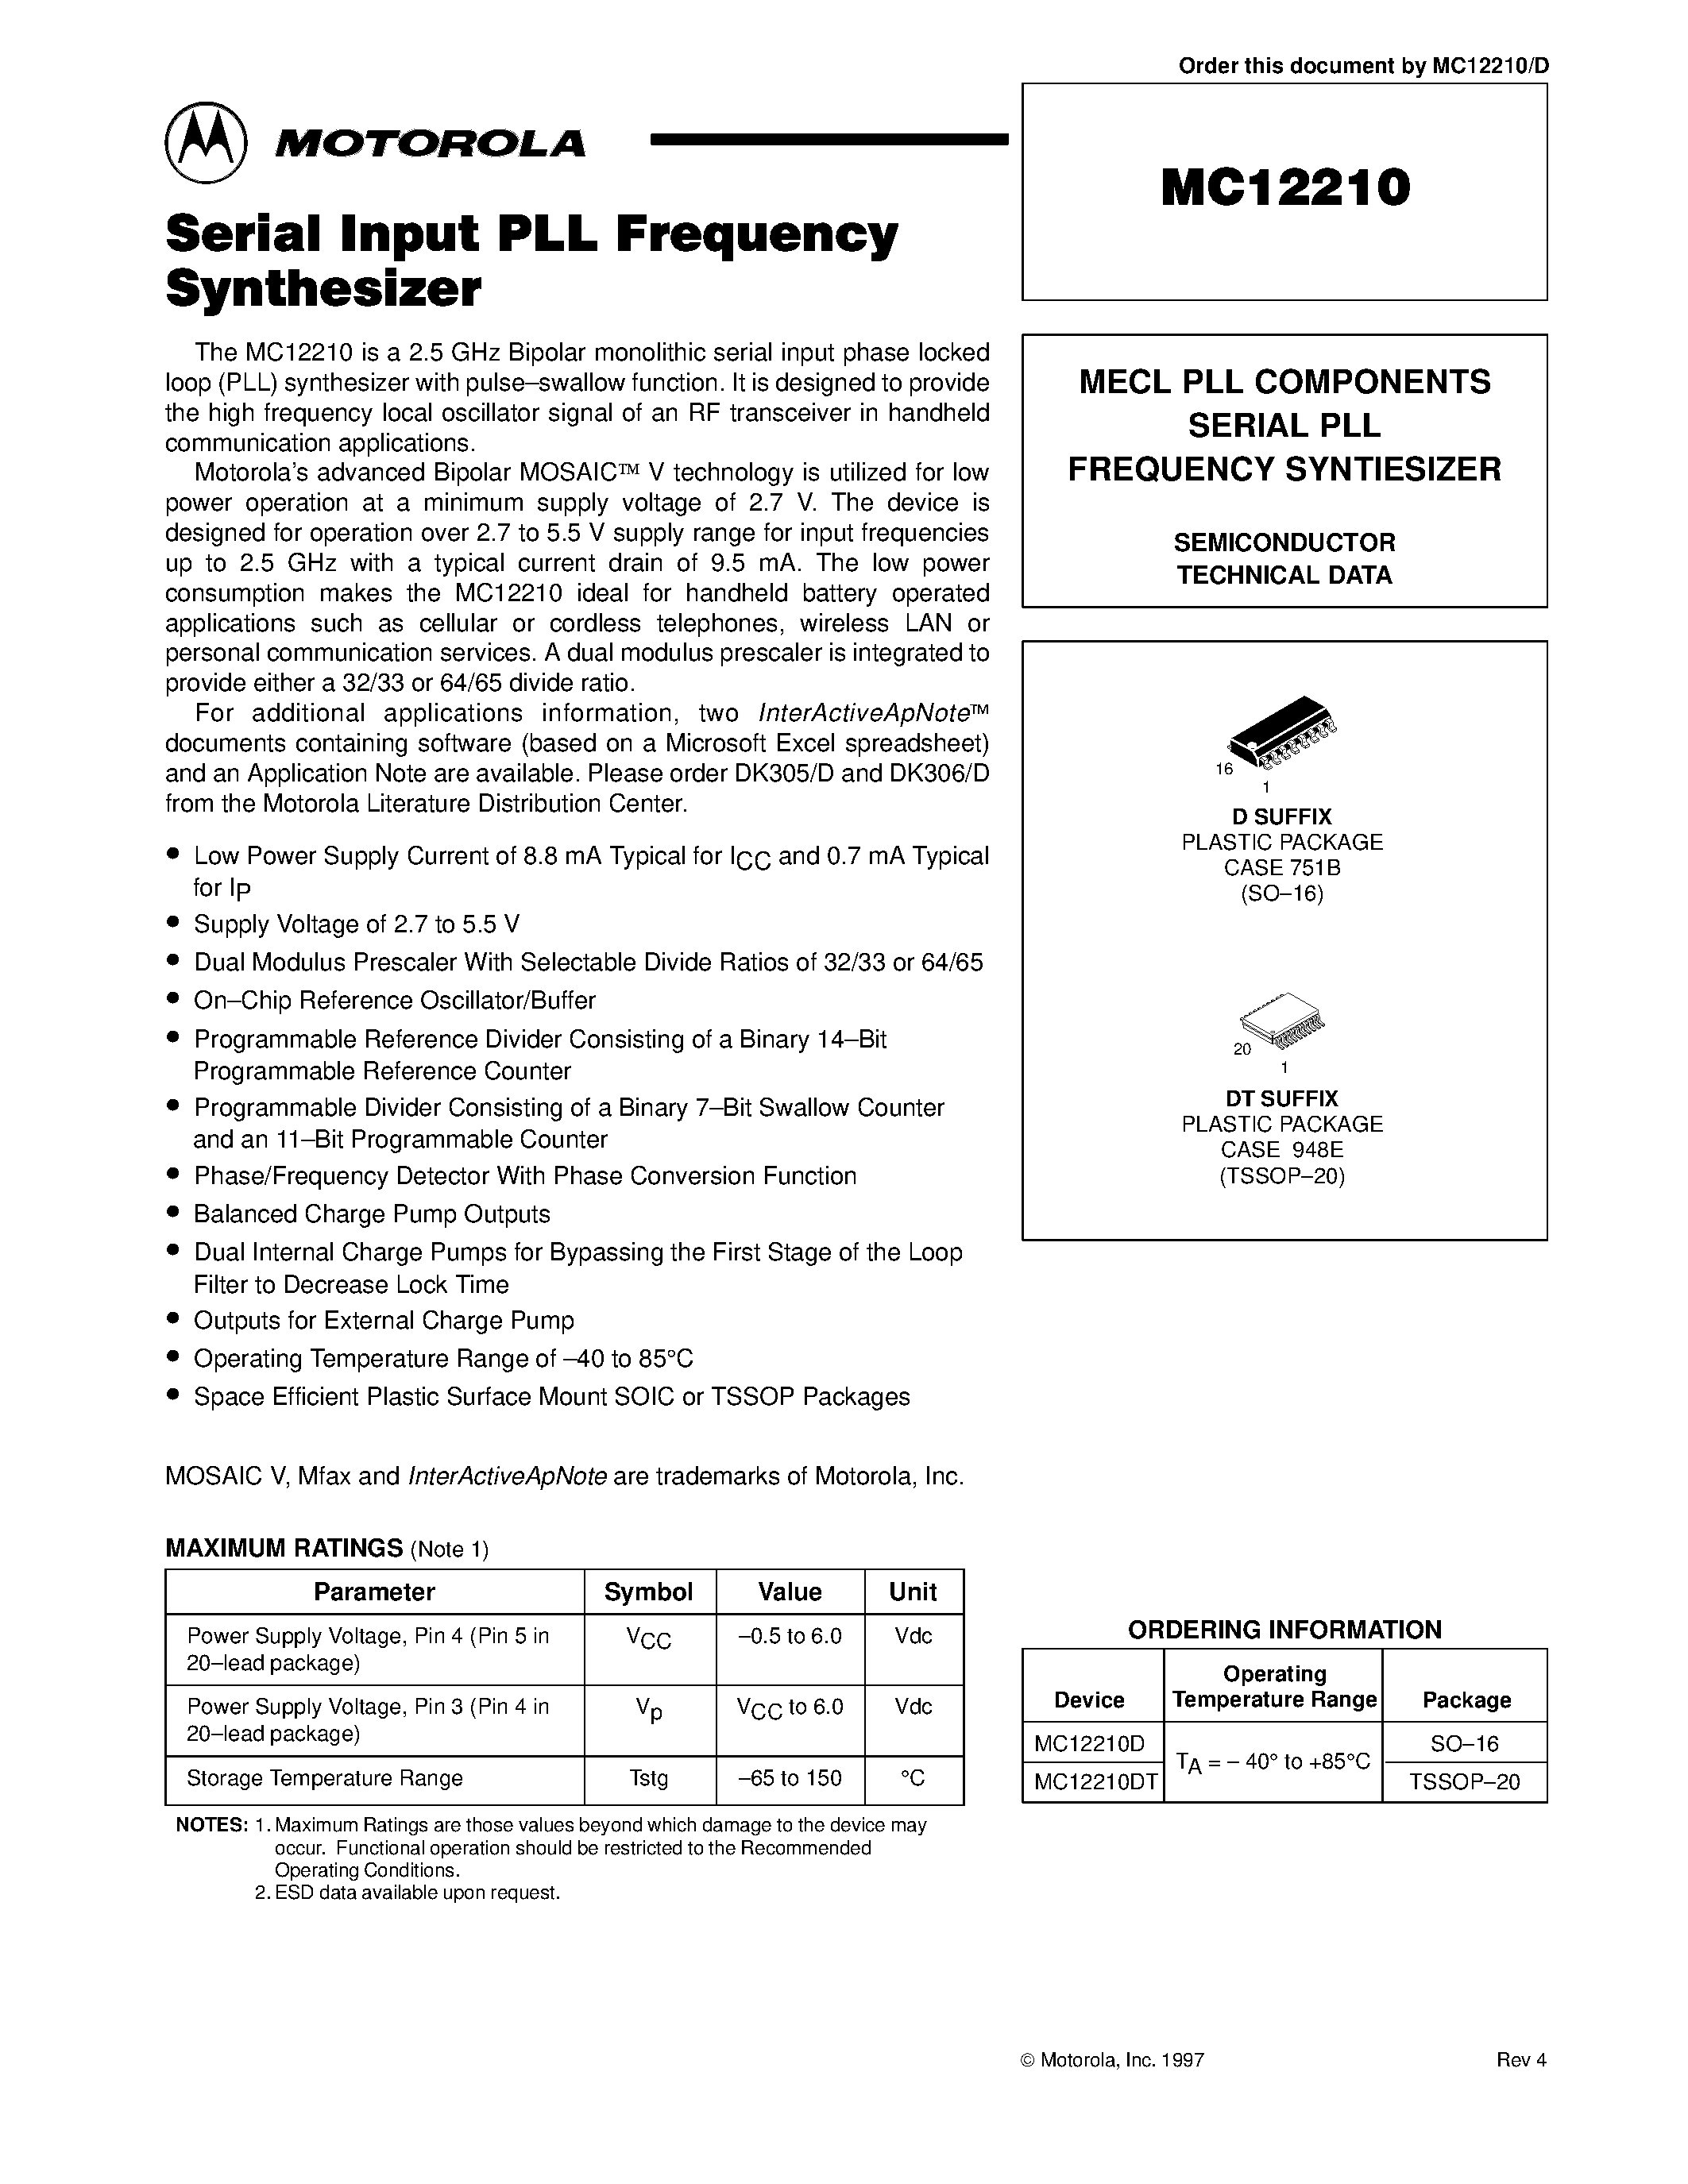 Datasheet MC12210DT - MECL PLL COMPONENTS SERIAL PLL FREQUENCY SYNTIESIZER page 1